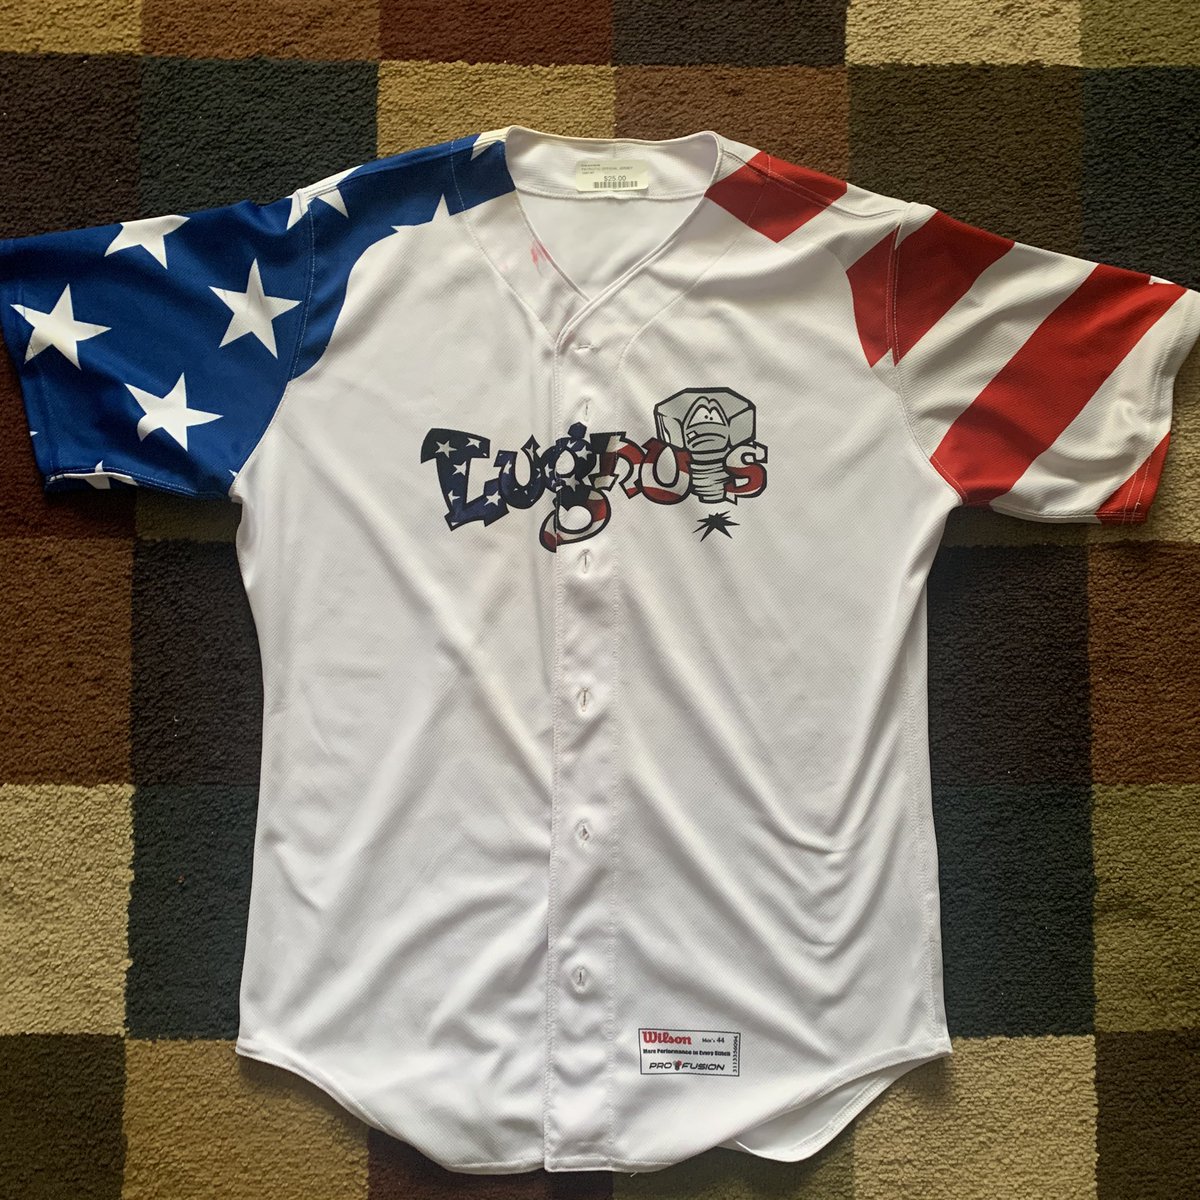 Fourth of July 2019 Game Worn.Suuuuuuper geeked about this one